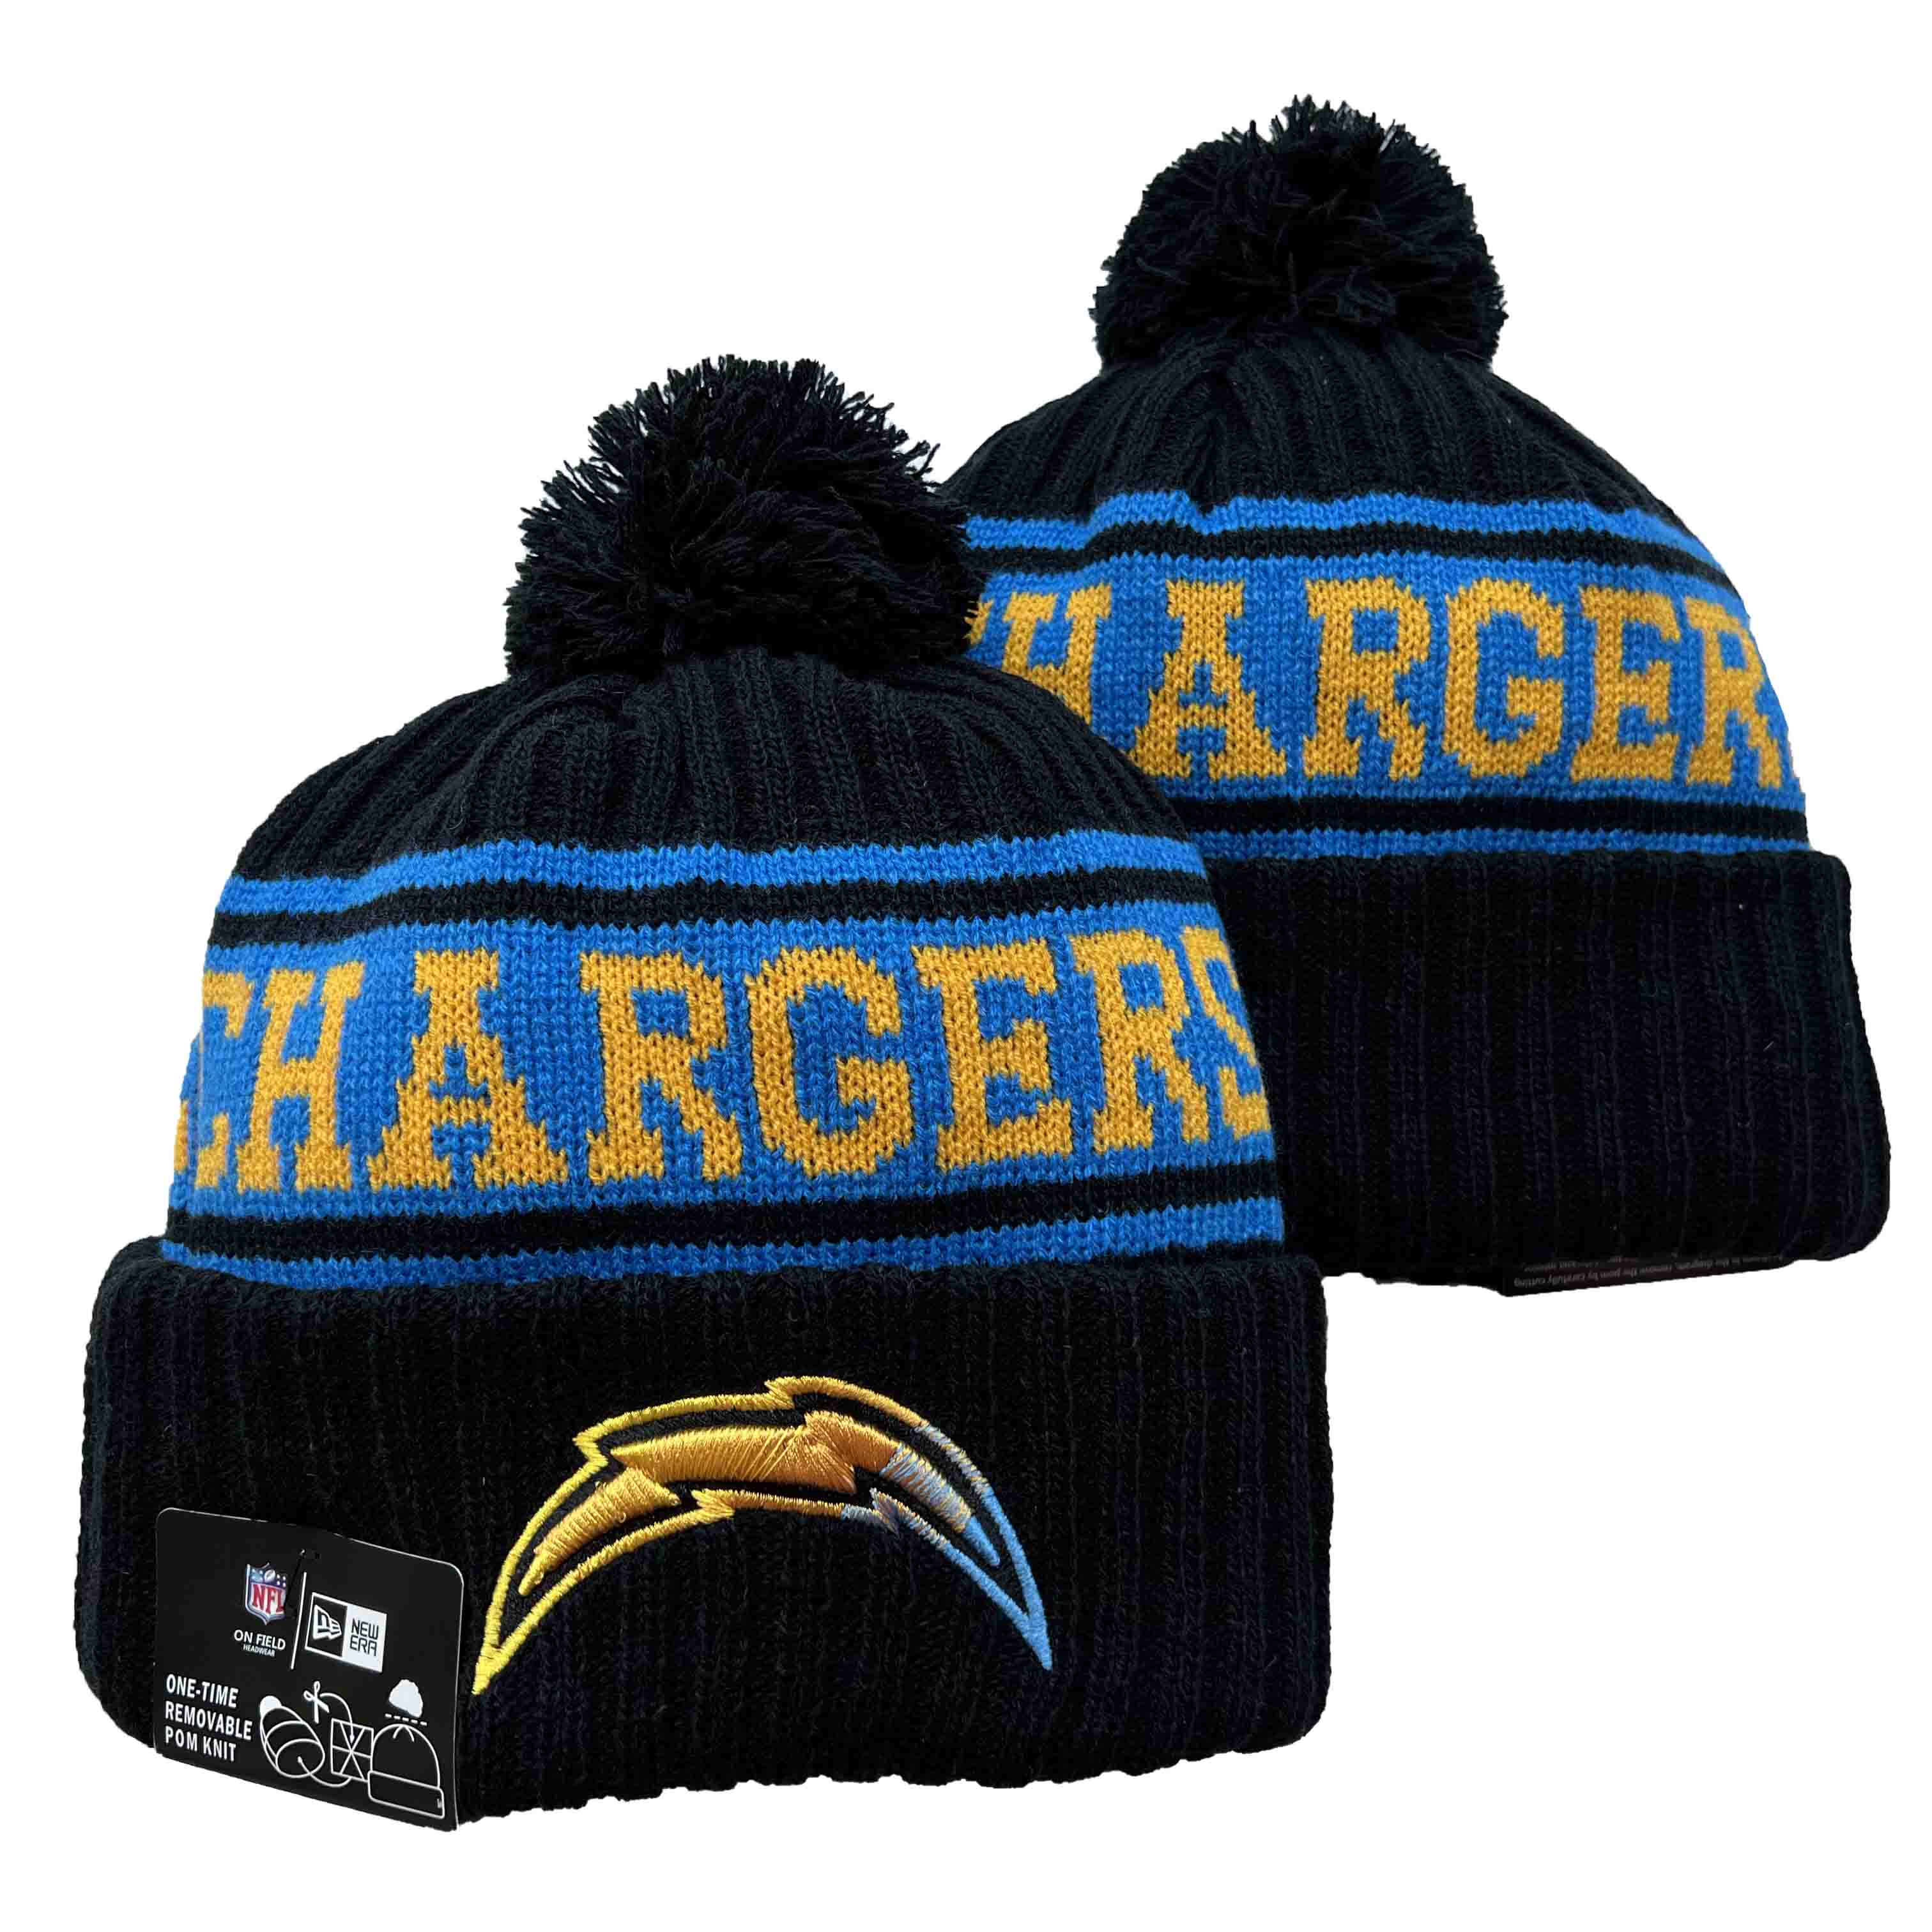 NFL San Diego Chargers Beanies Knit Hats-YD1118